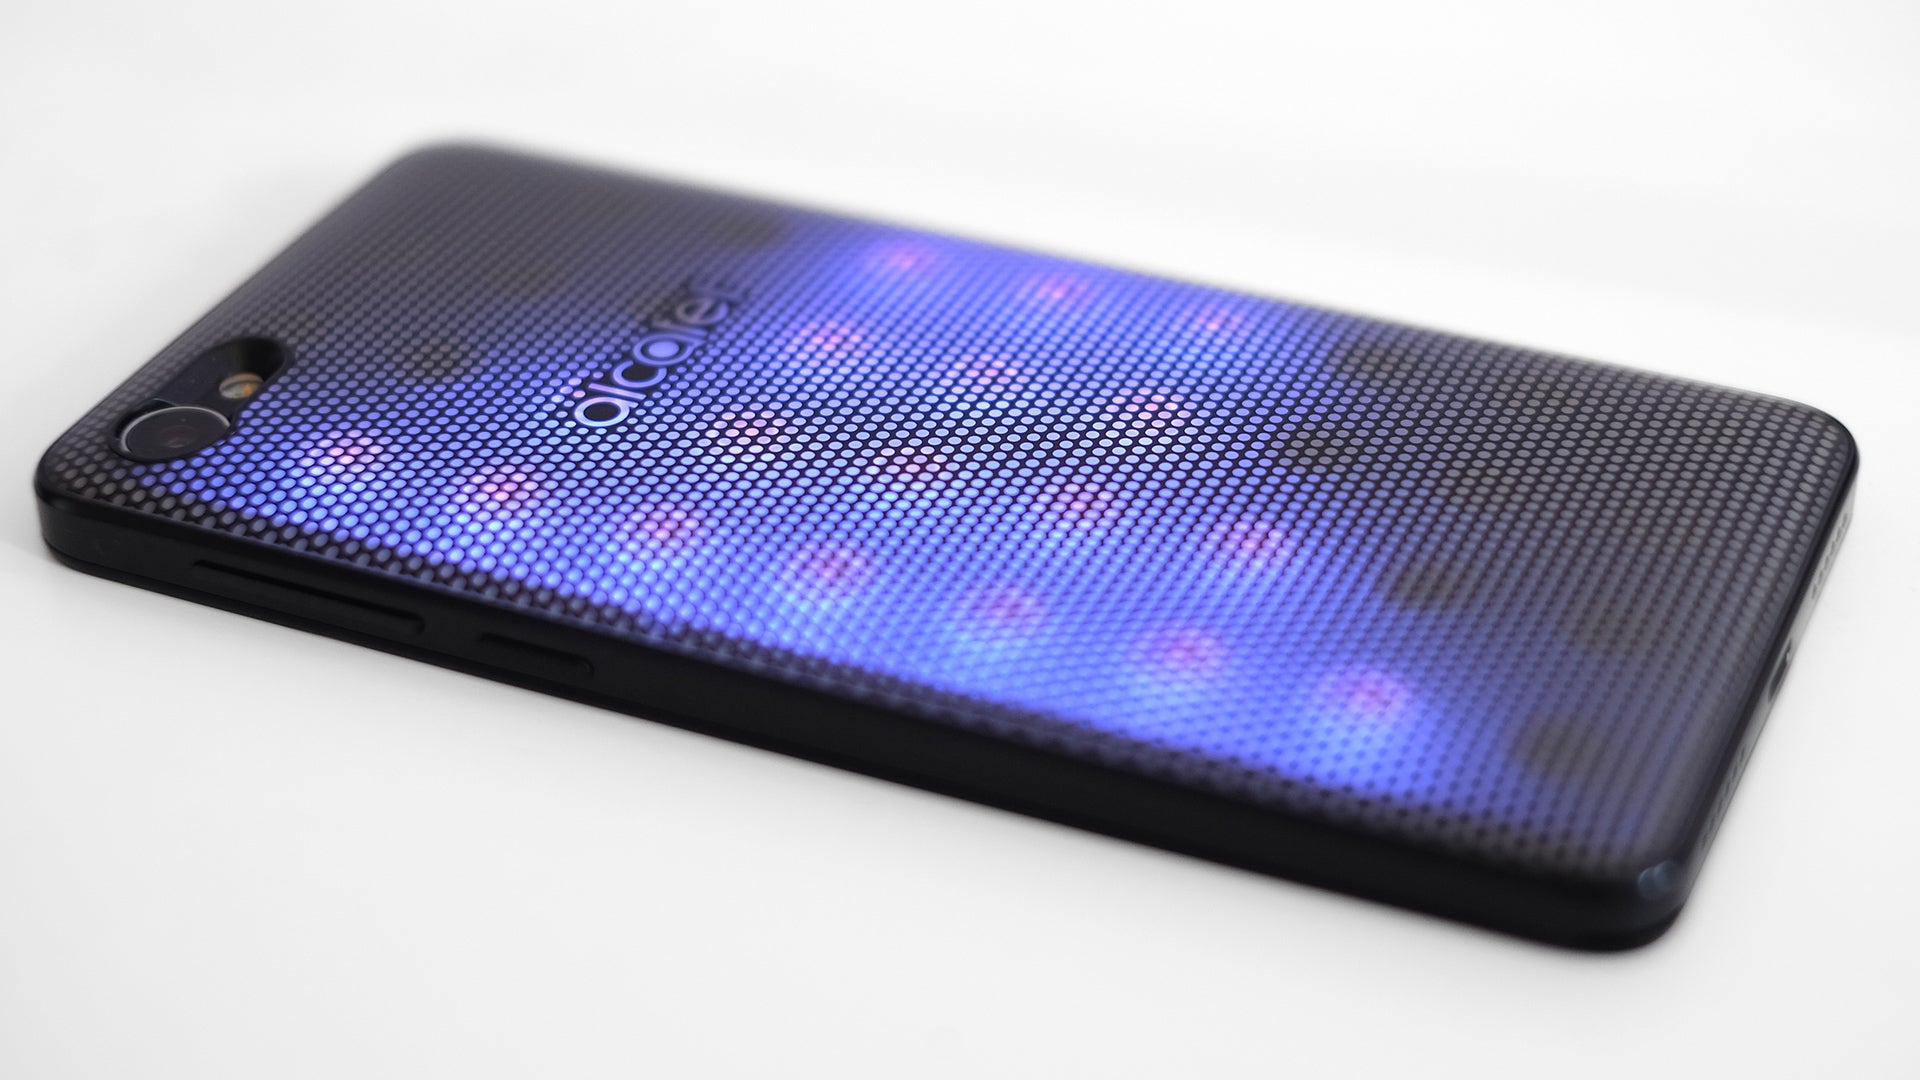 Alcatel A5 LED smartphone with illuminated back cover.